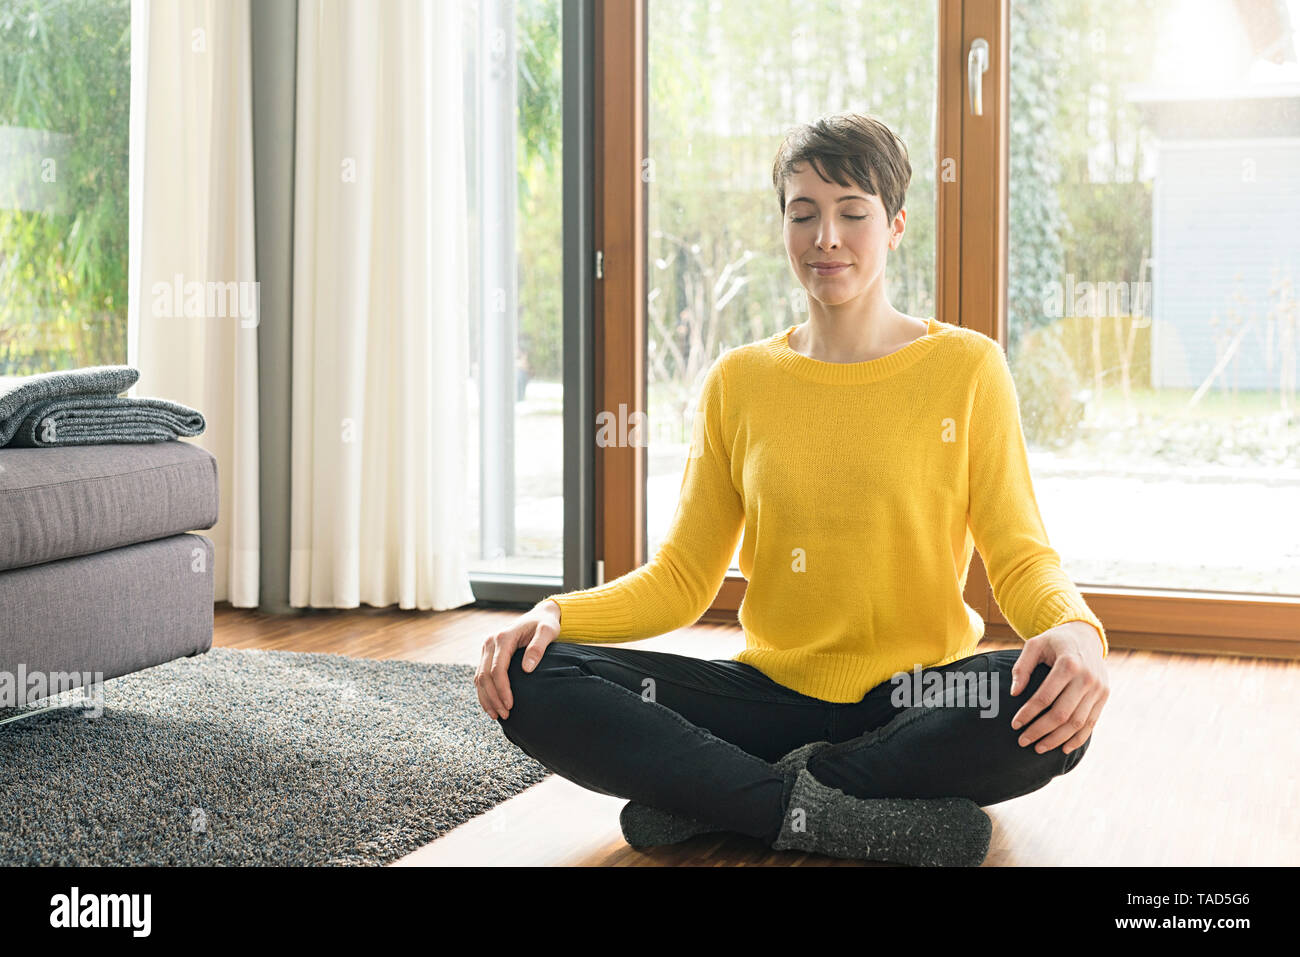 Portrait of woman sitting on the floor of living room meditating Stock Photo